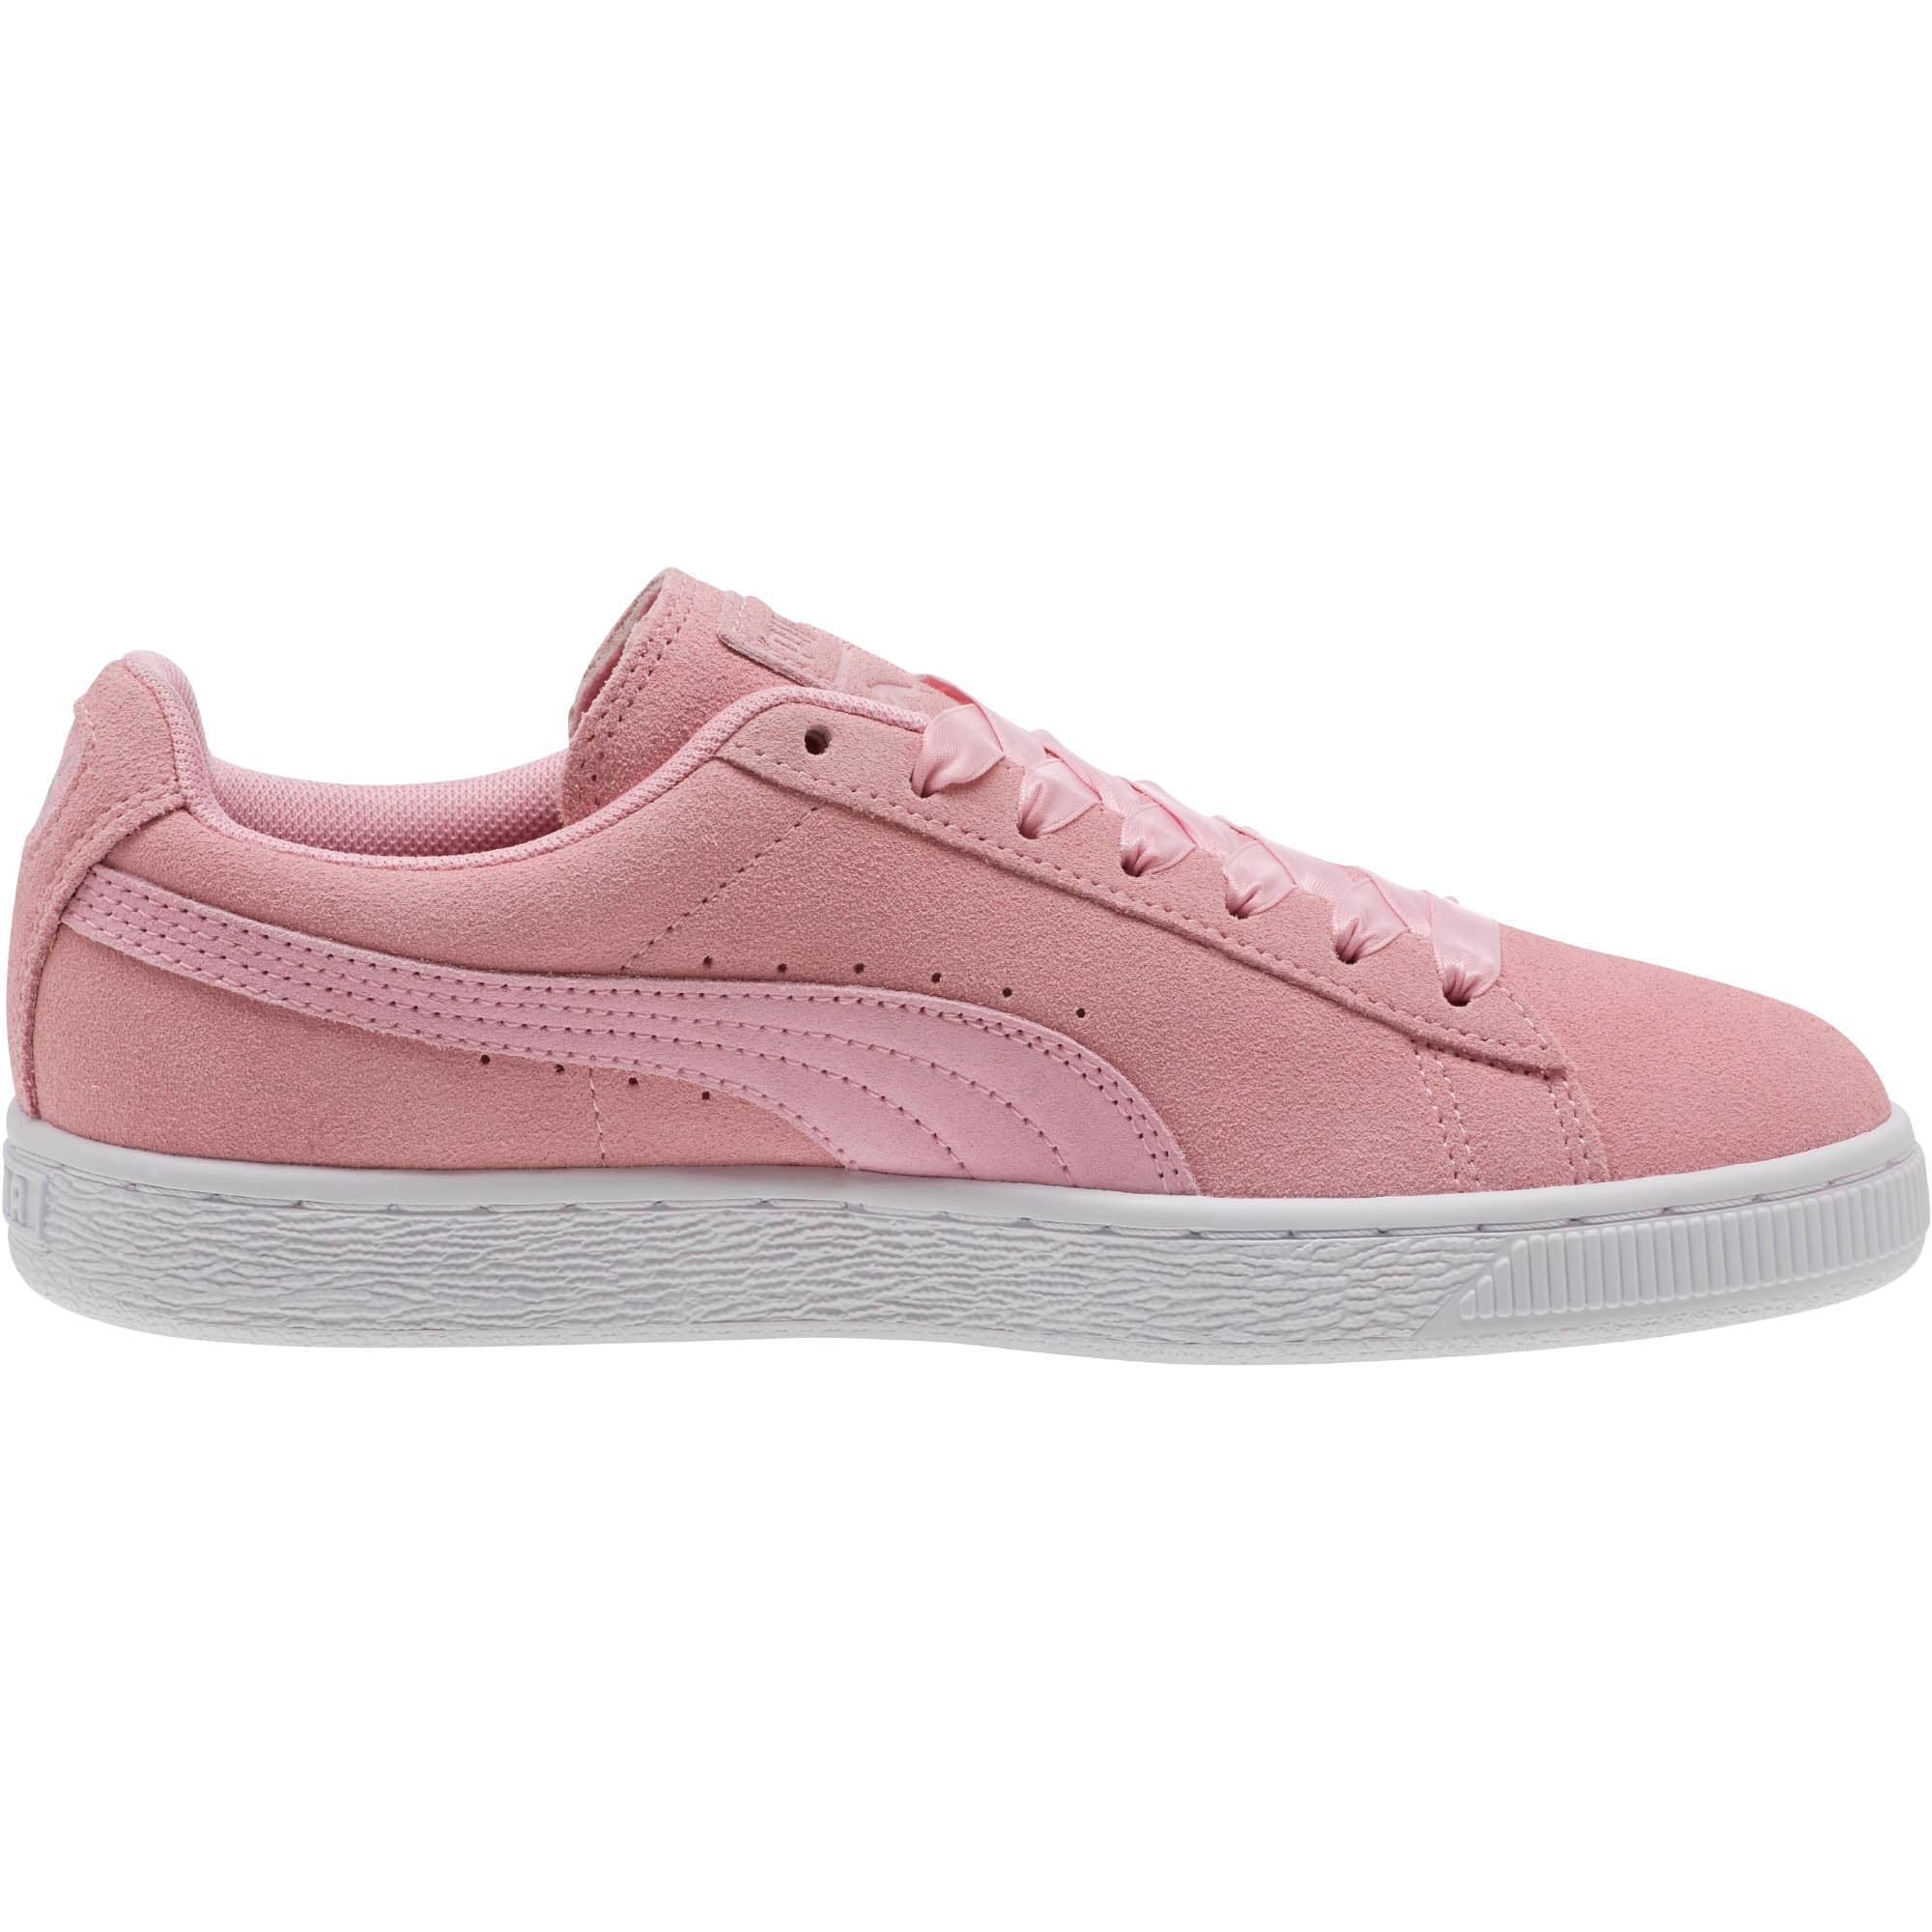 puma pink suede trainers